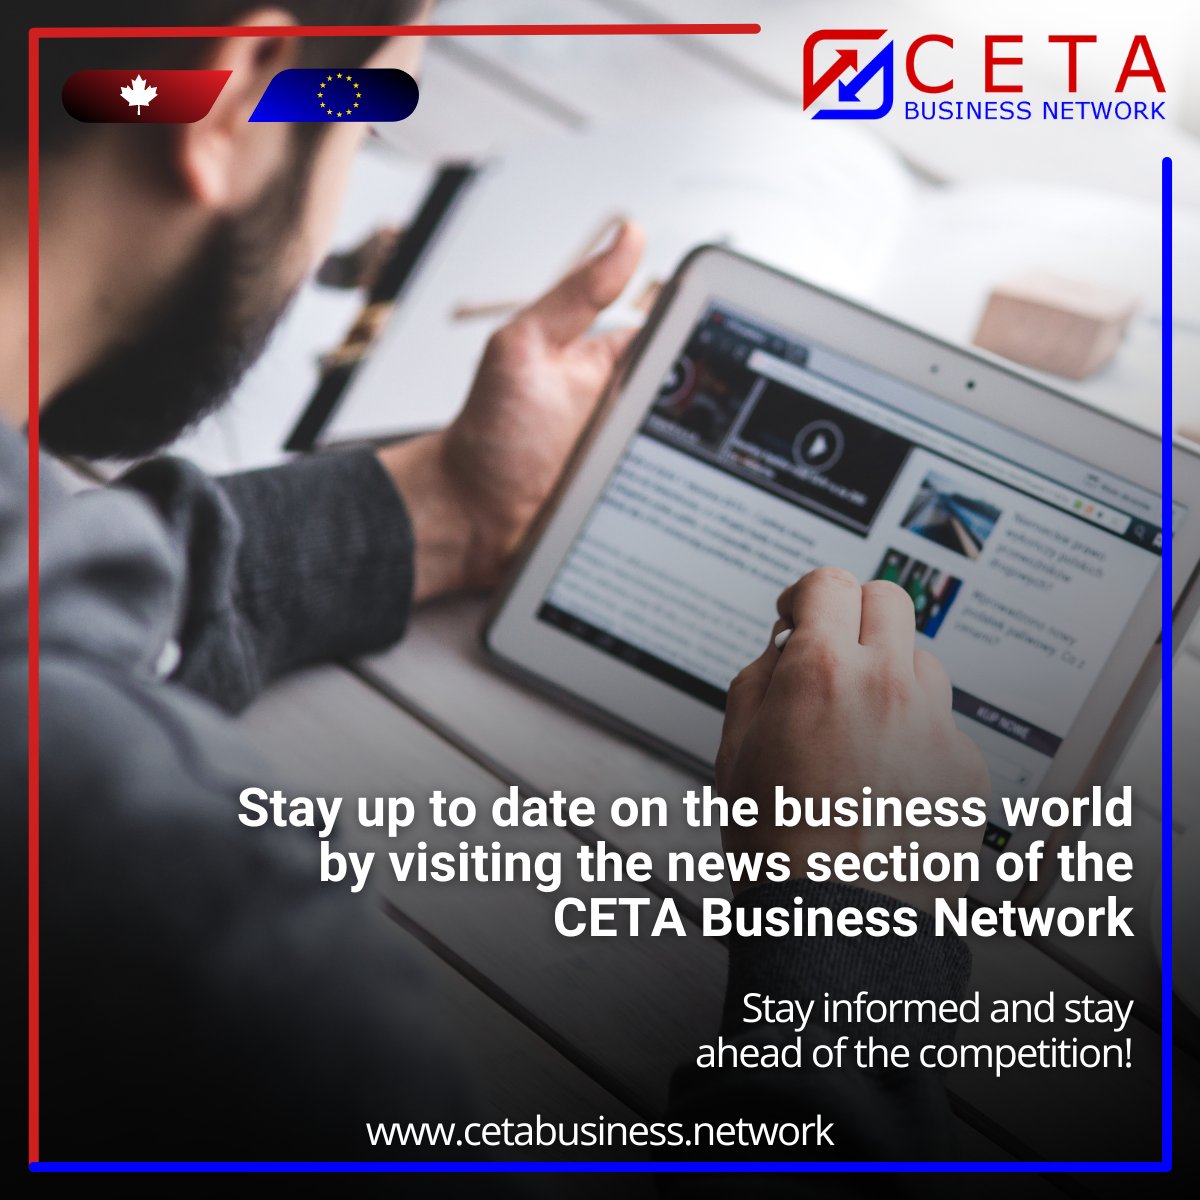 Keep yourself in the know with the CETA Business Network's comprehensive news section. Stay ahead of the curve with the latest business updates.
cetabusiness.network/blog/

#CETABusinessNetwork #Network #Business #CETA #News #Europe #Canada #BusinessUpdates